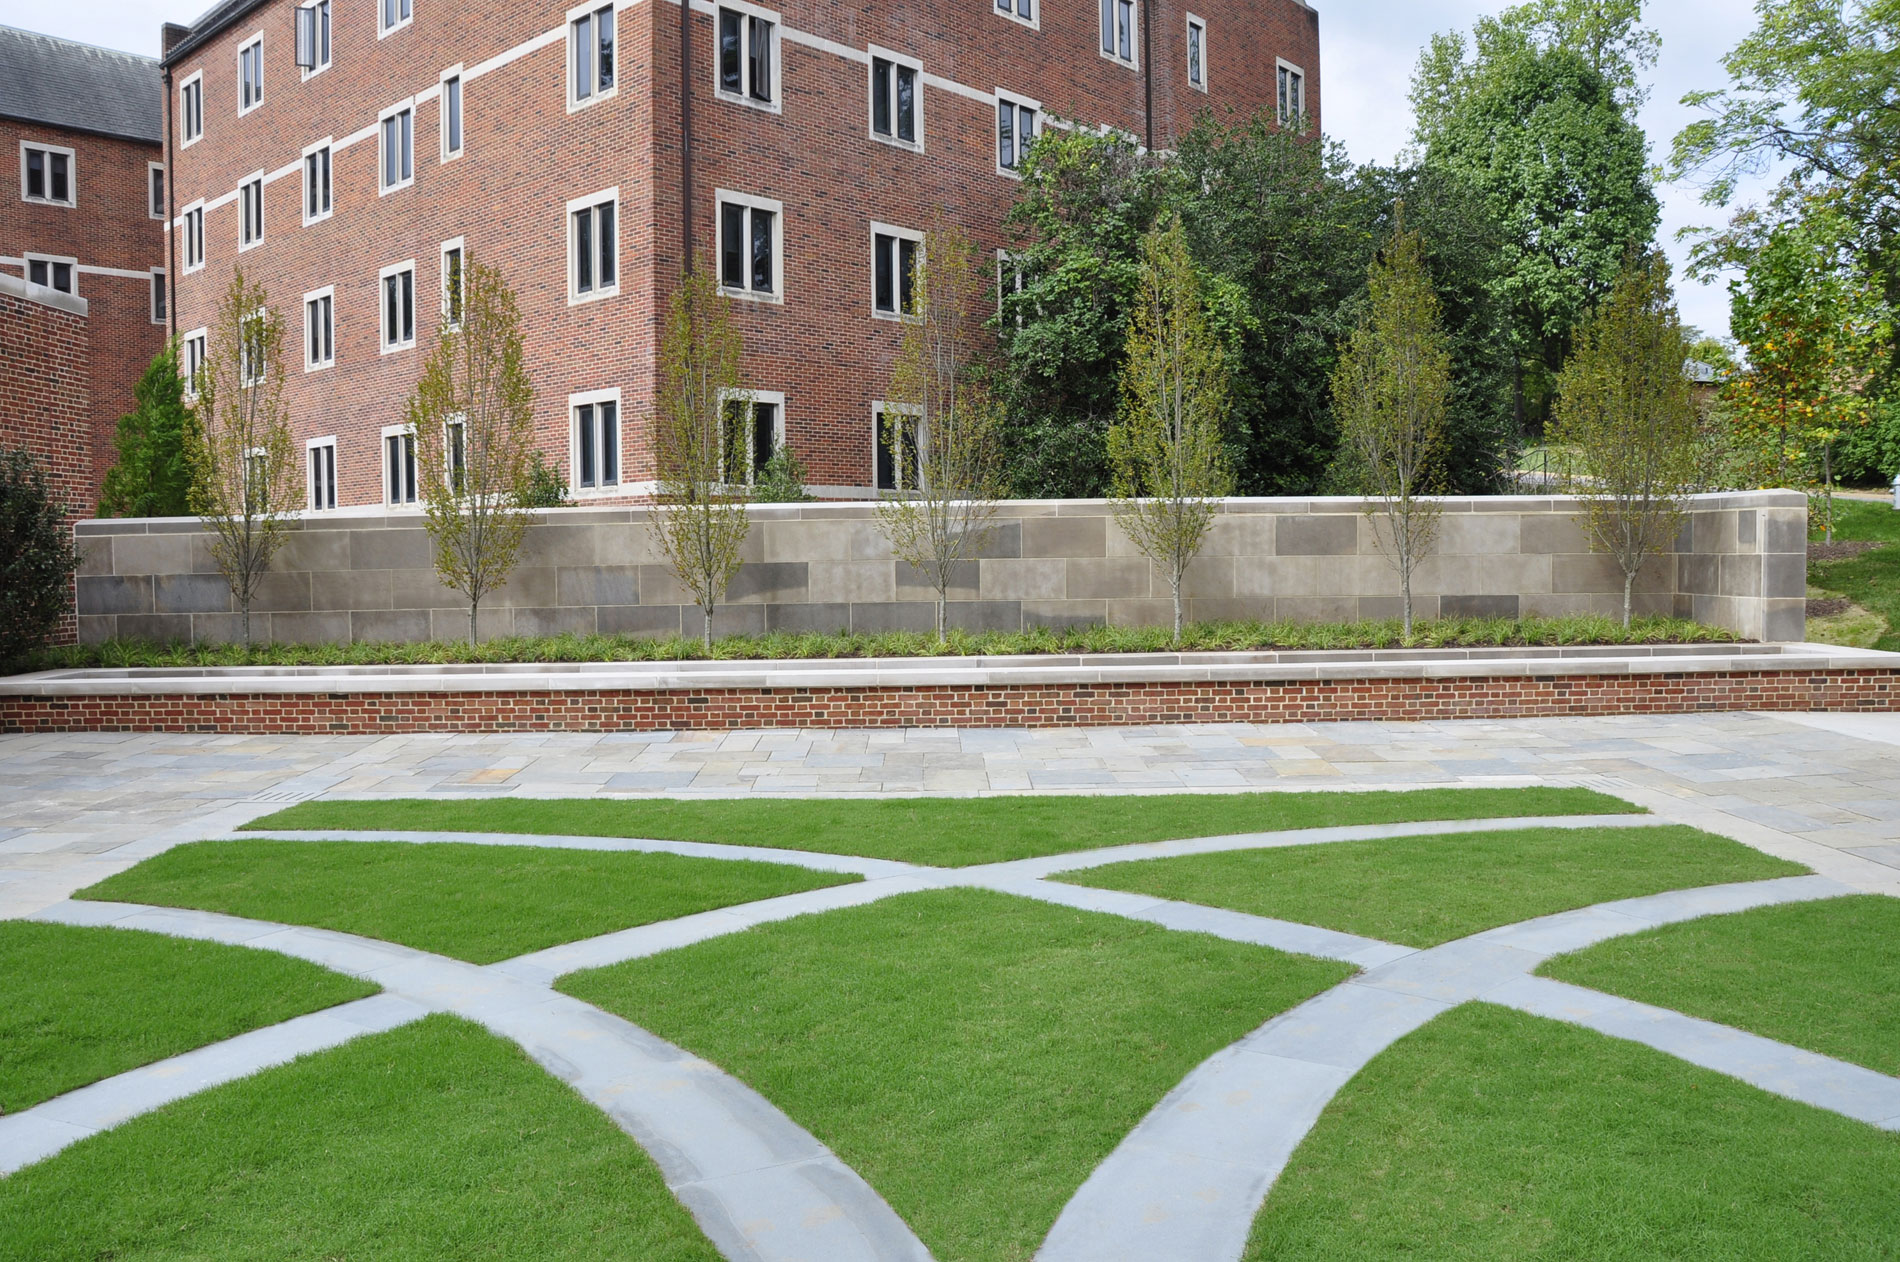 View from within the courtyard looking across the grass panel to the fountain, which is contained by a brick seat wall. Behind the fountain a planting of Fastigiate Hornbeam will eventually form an aerial hedge that will be clipped above the height of the limestone wall behind and create a greater sense of enclosure on this edge of the courtyard.